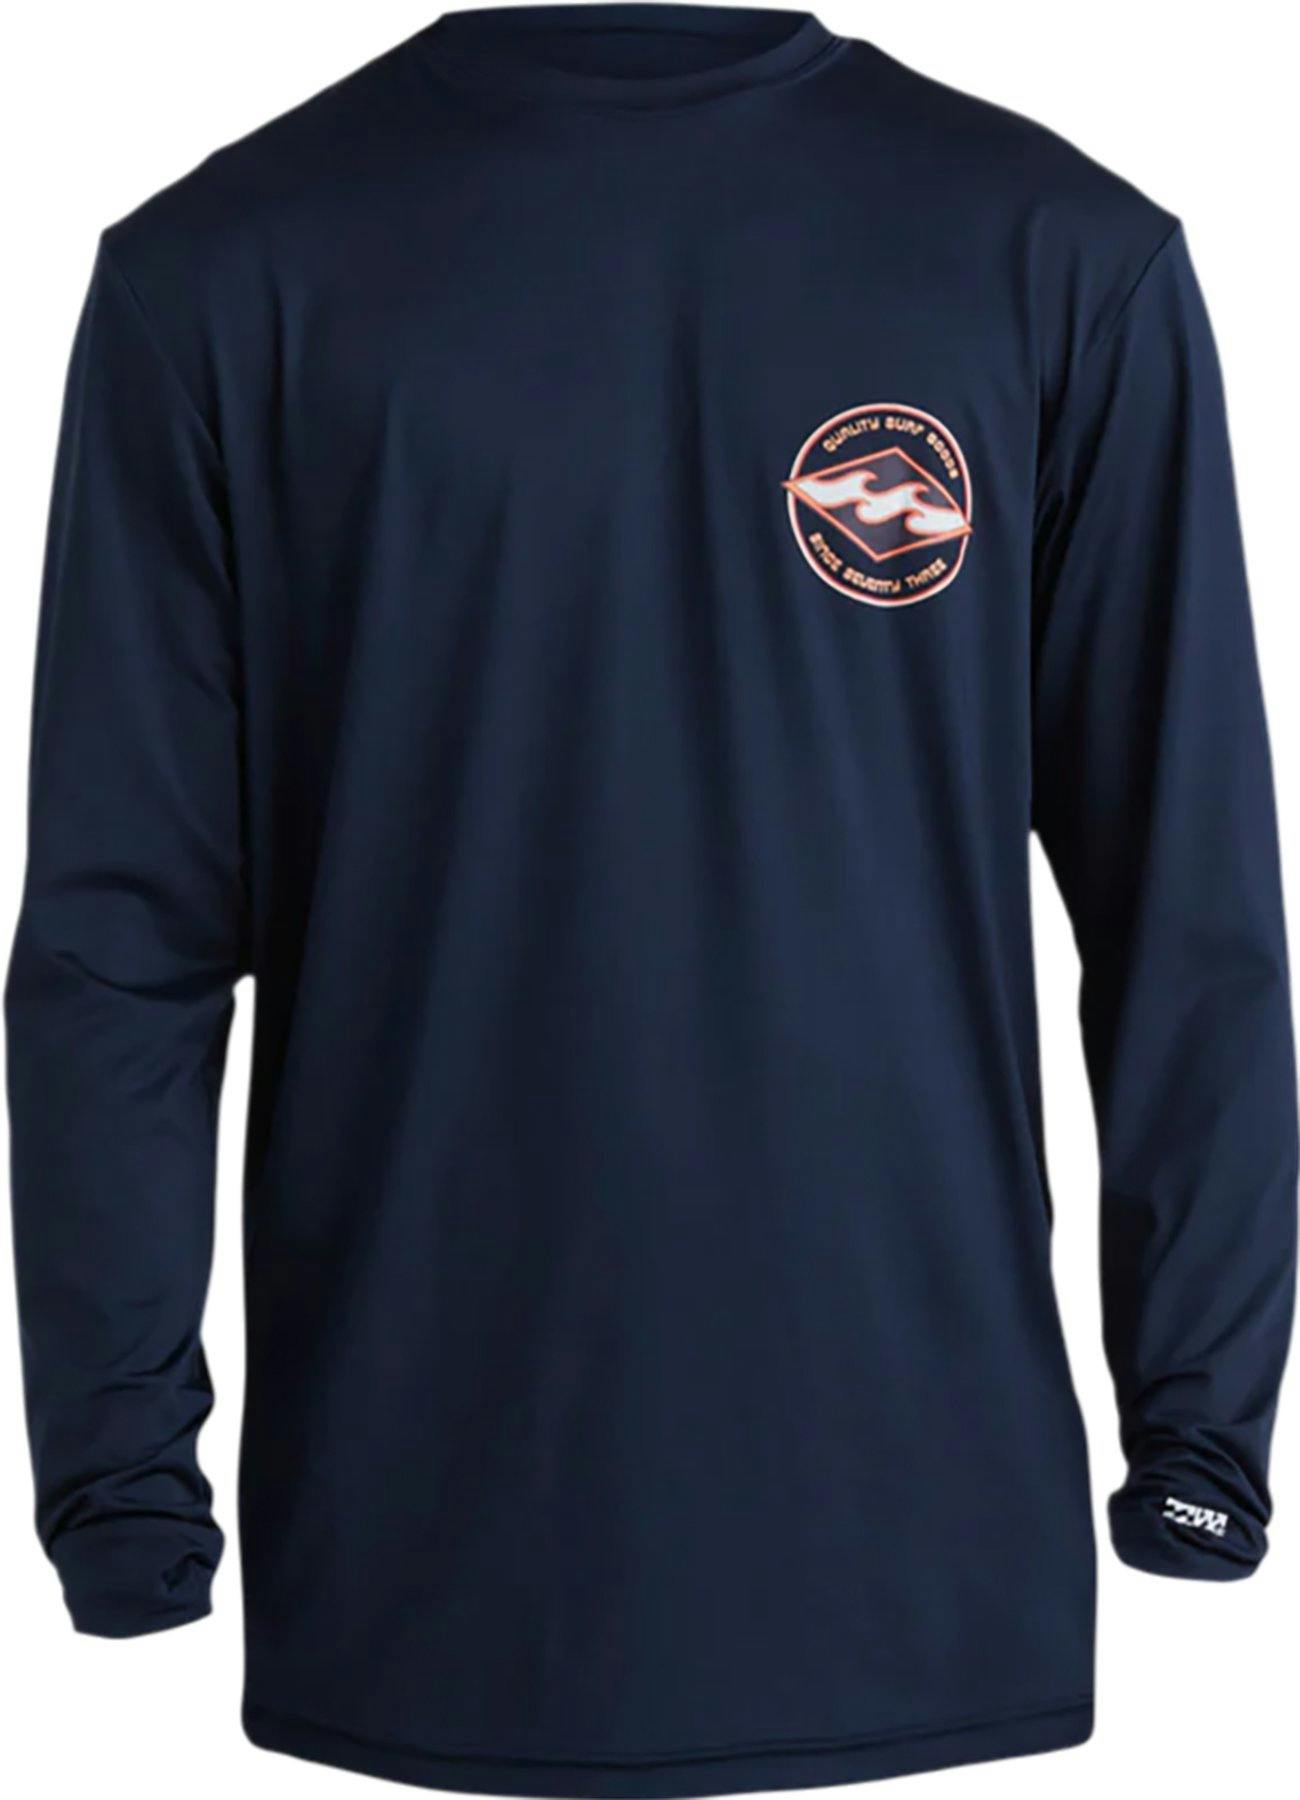 Product image for Rotor Diamond S Loose Fit Long Sleeve Surf T-Shirt - Boys